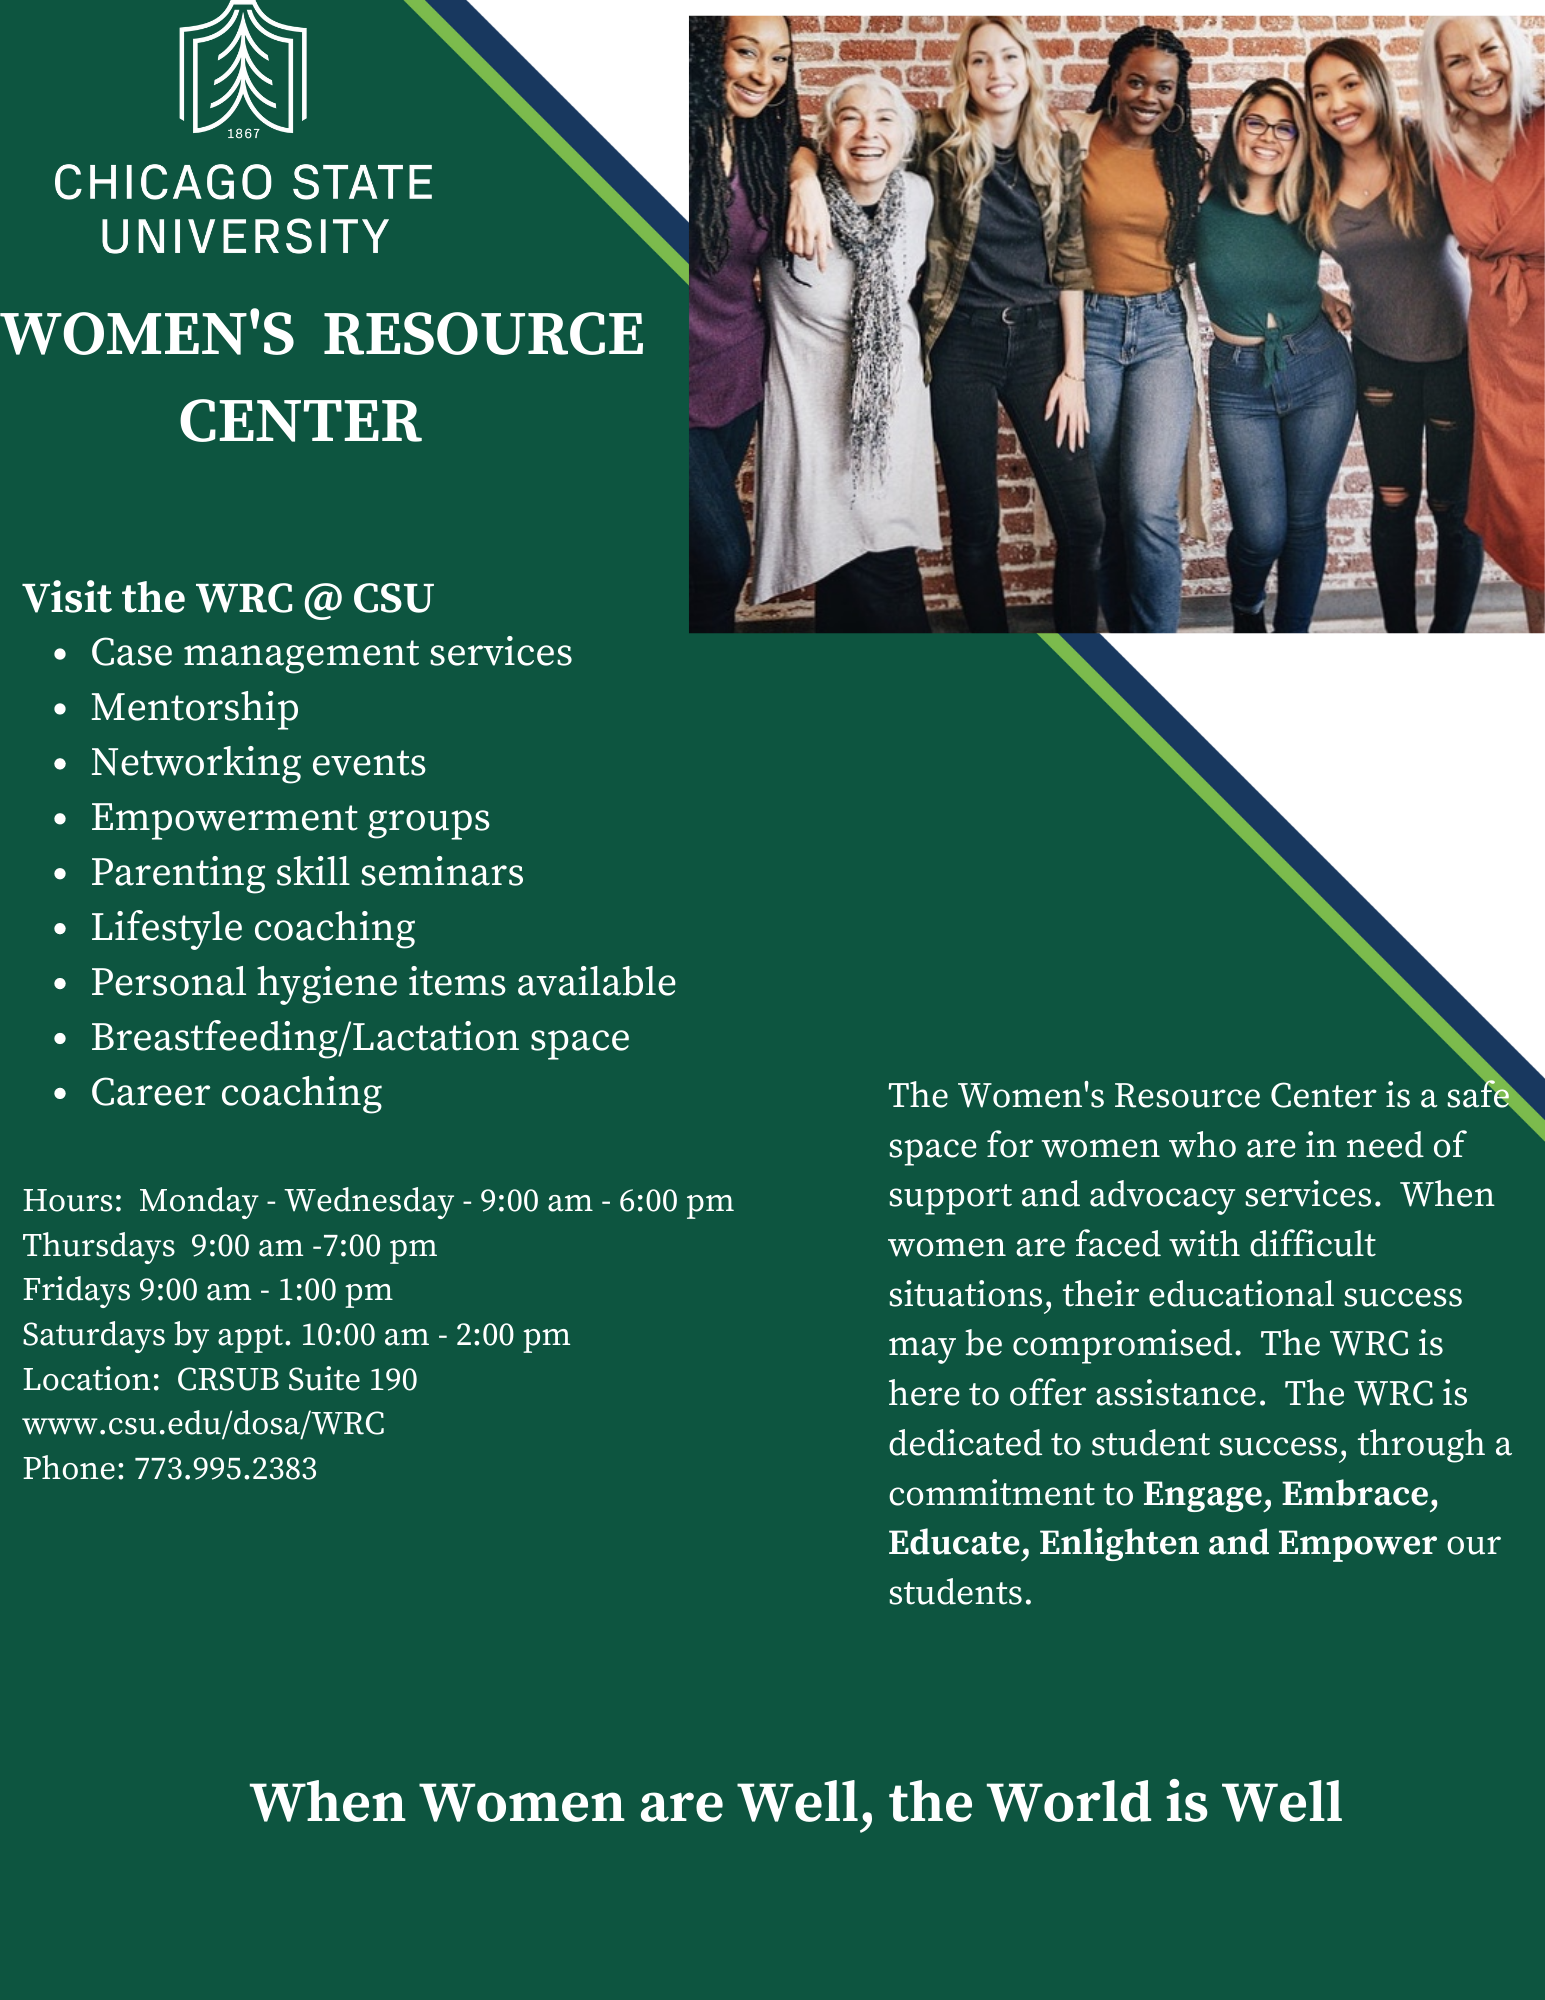 Welcome to the Women's Resource Center